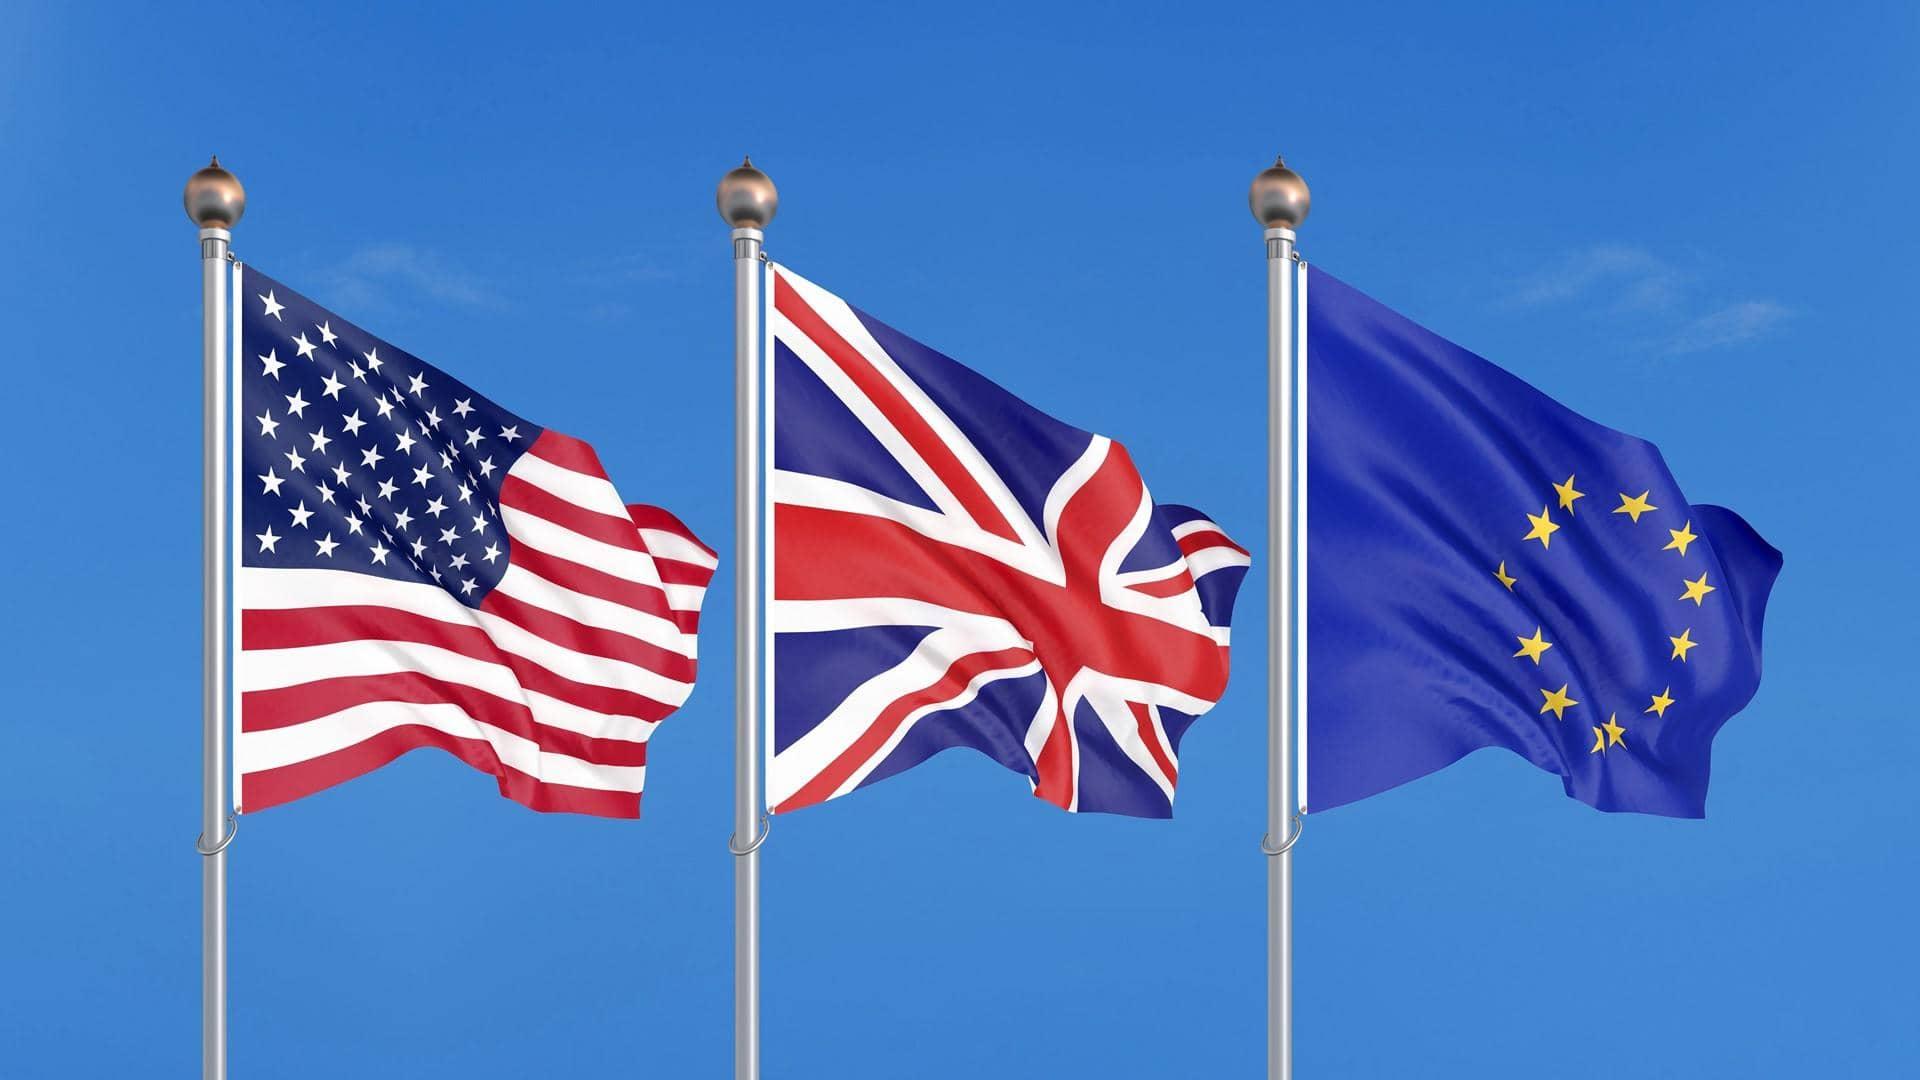 The US, UK and EU flags. Post-pandemic, banks need to rethink how they support global trade.
